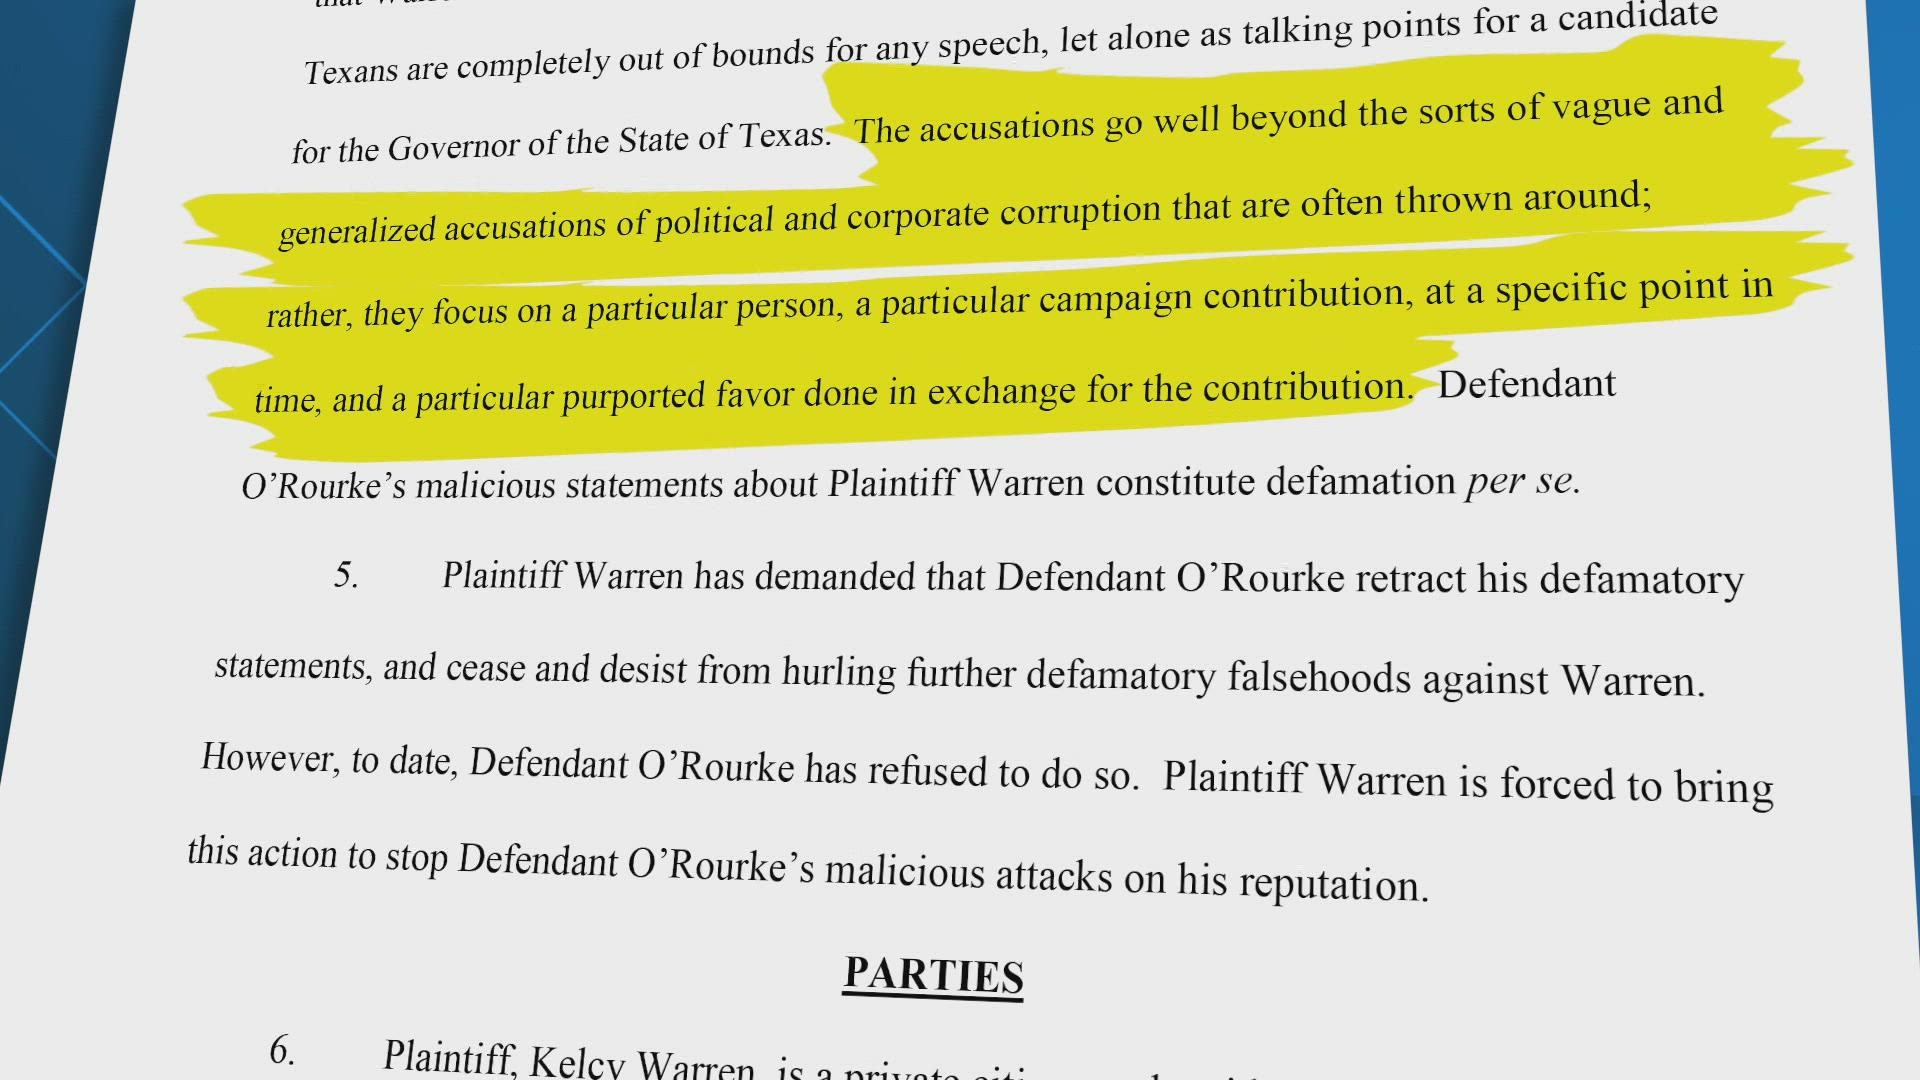 Warren alleges that O’Rourke is falsely suggesting that he did something illegal. O’Rourke says Warren is trying to silence him. Legal discovery could be revealing.